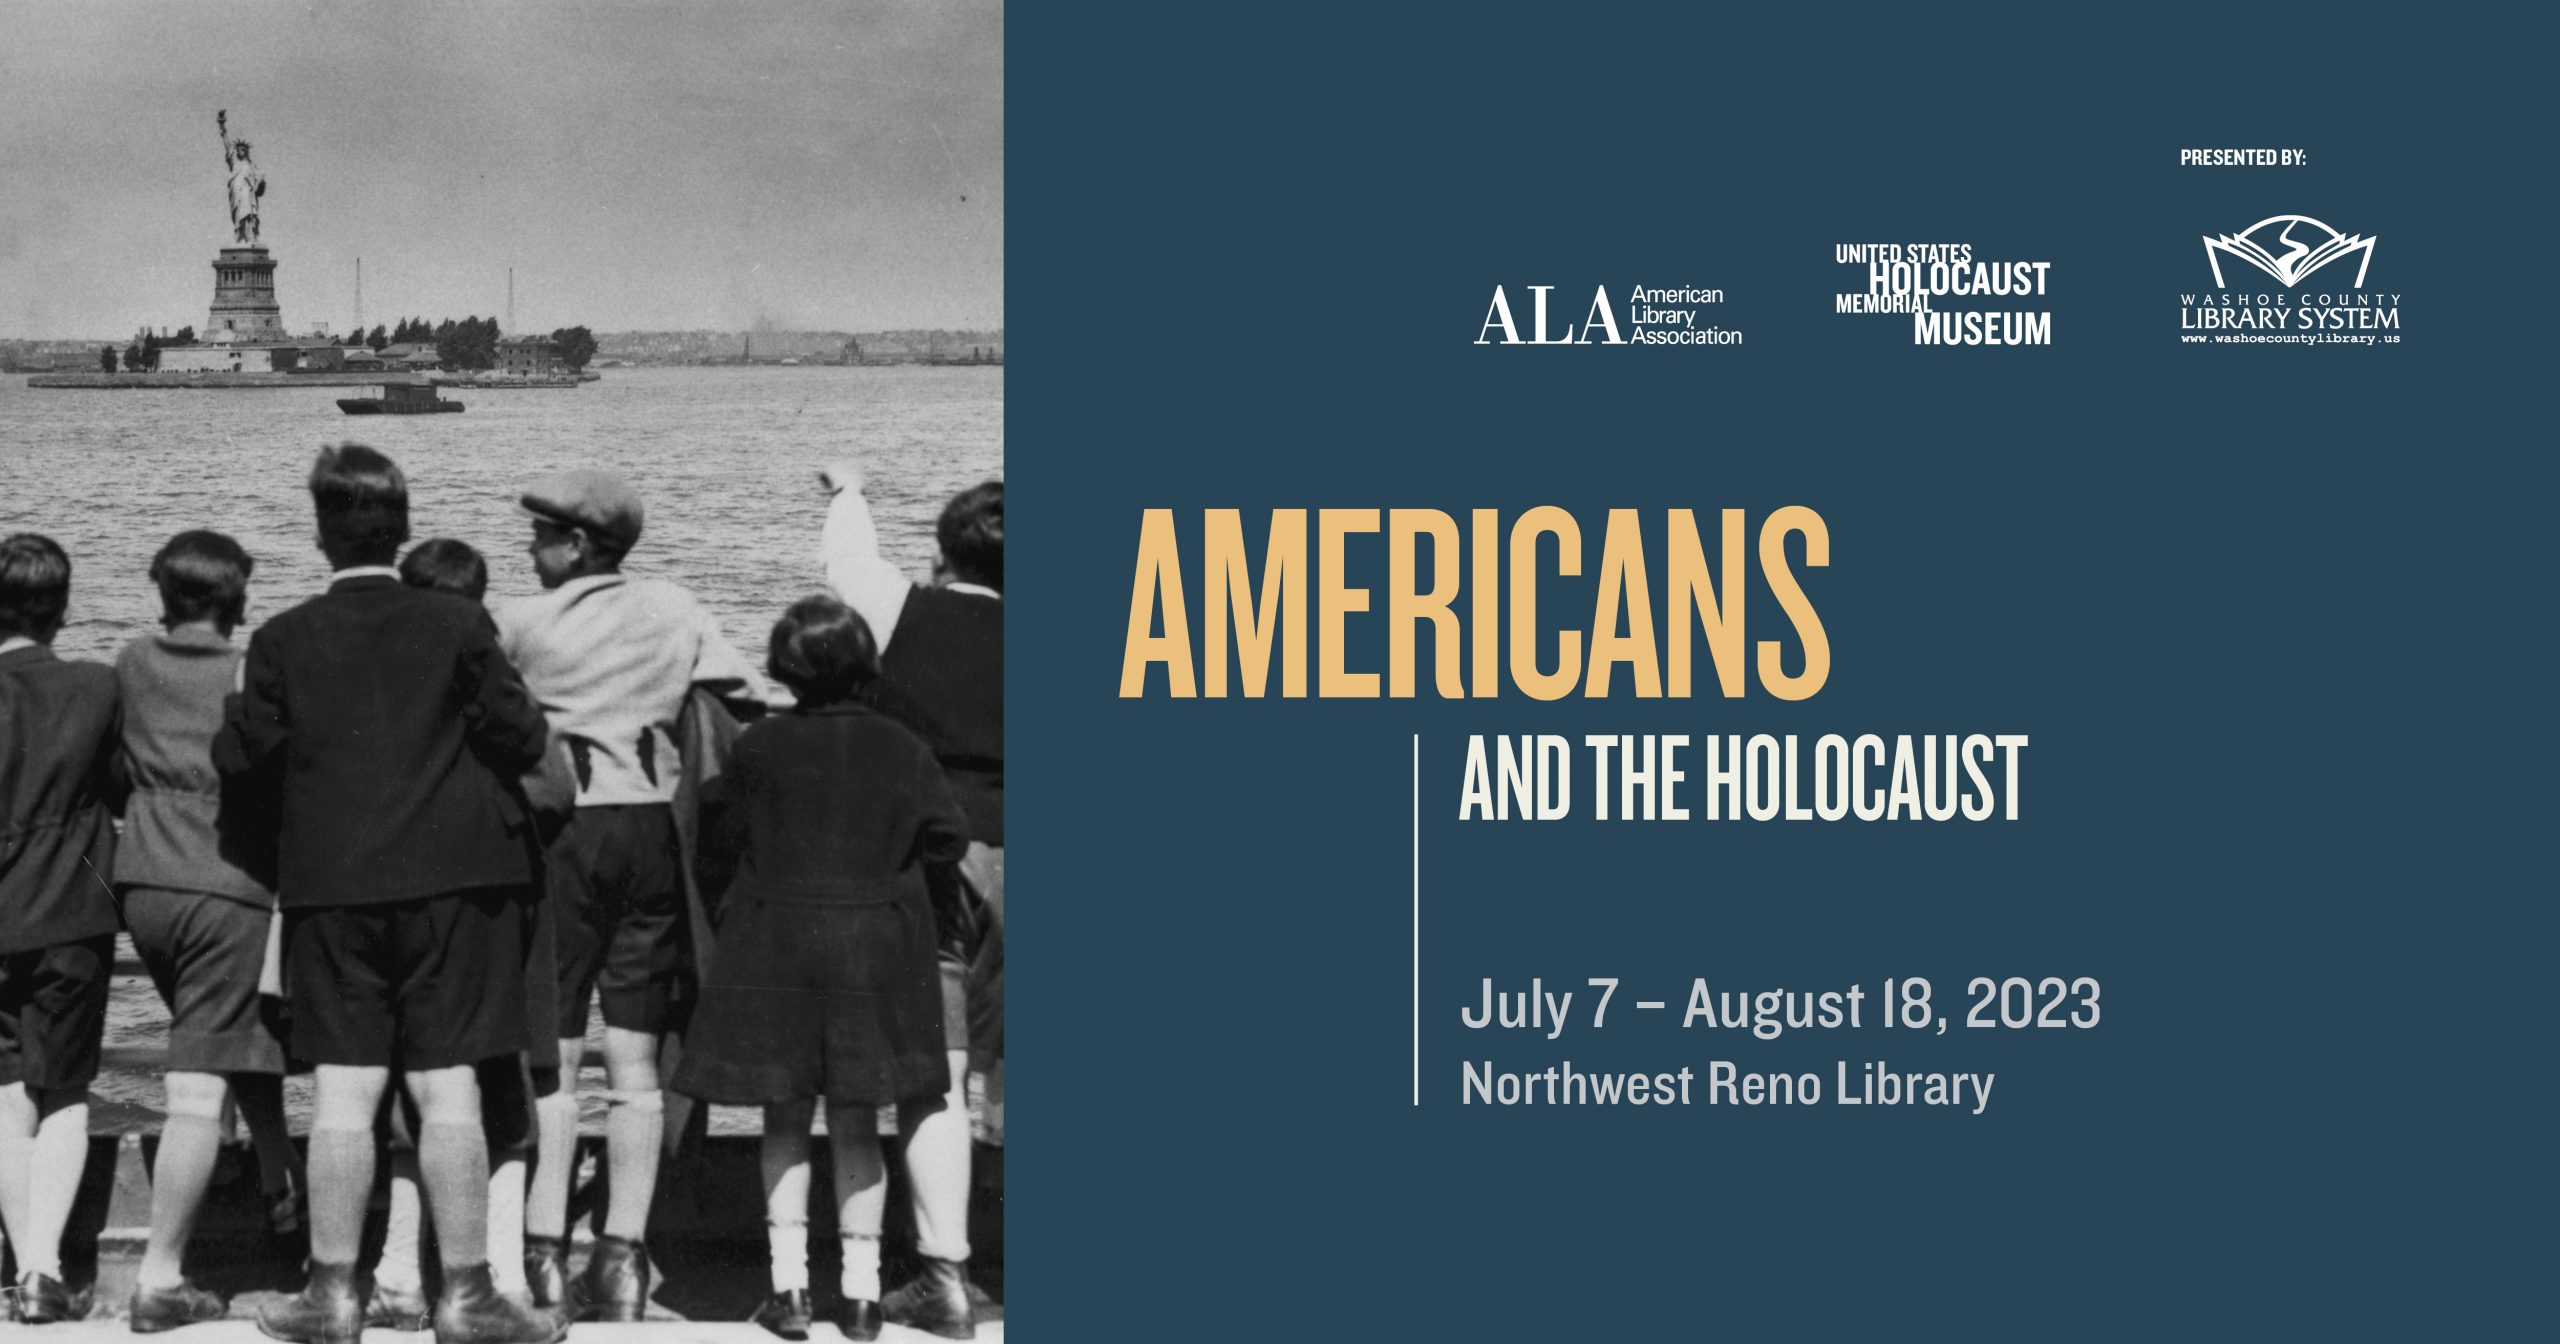 Americans and the Holocaust, July 7-August 18, 2023, Northwest Reno Library